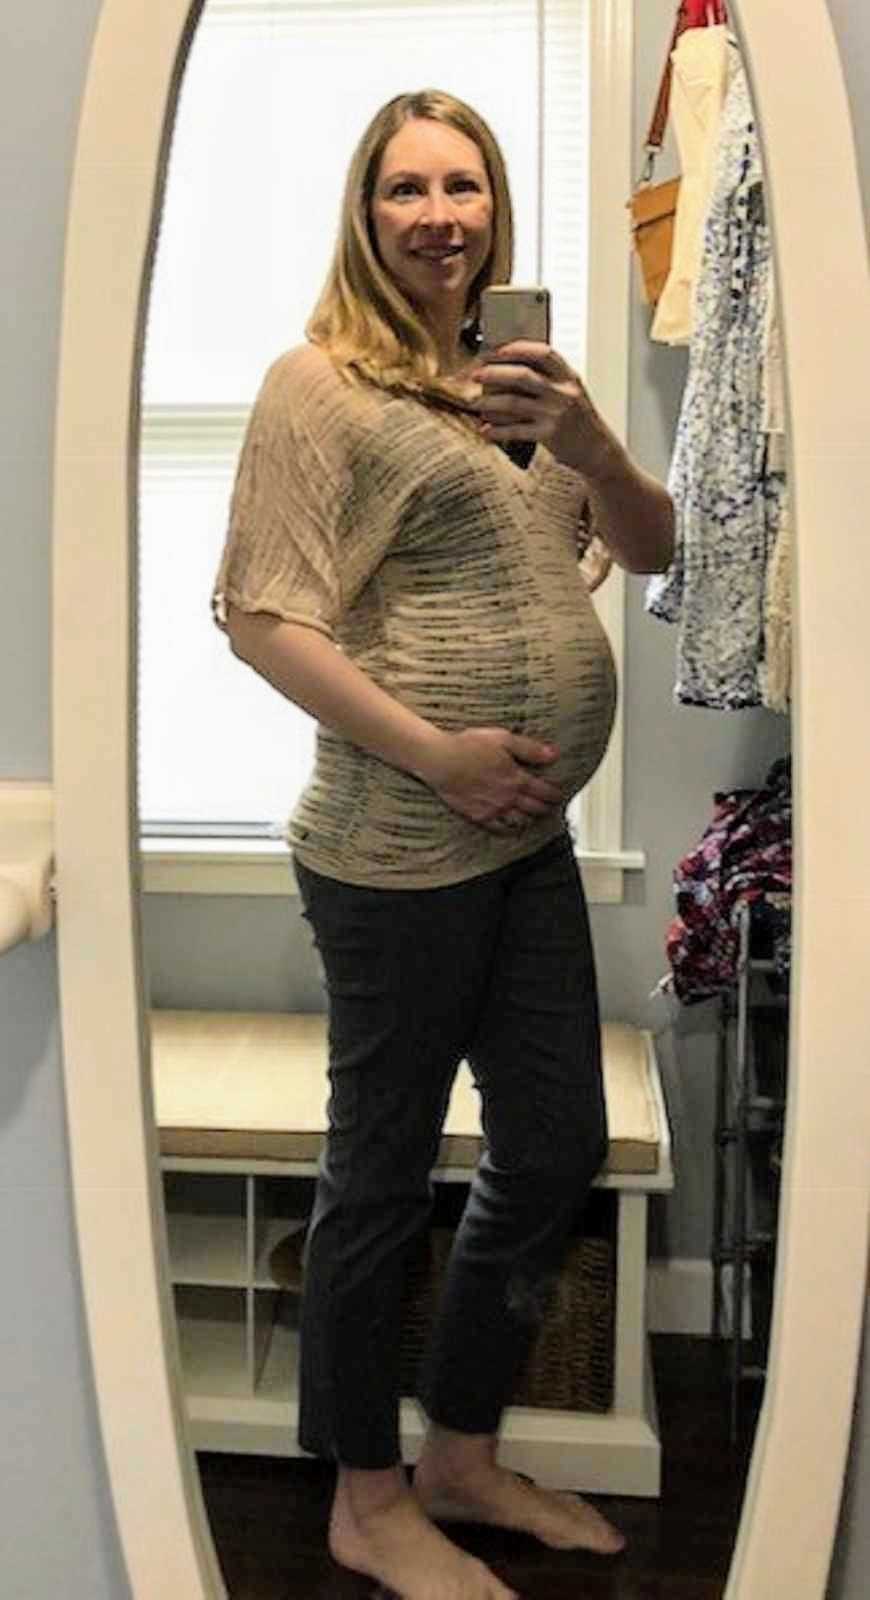 Pregnant woman stands smiling while holding stomach in mirror selfie